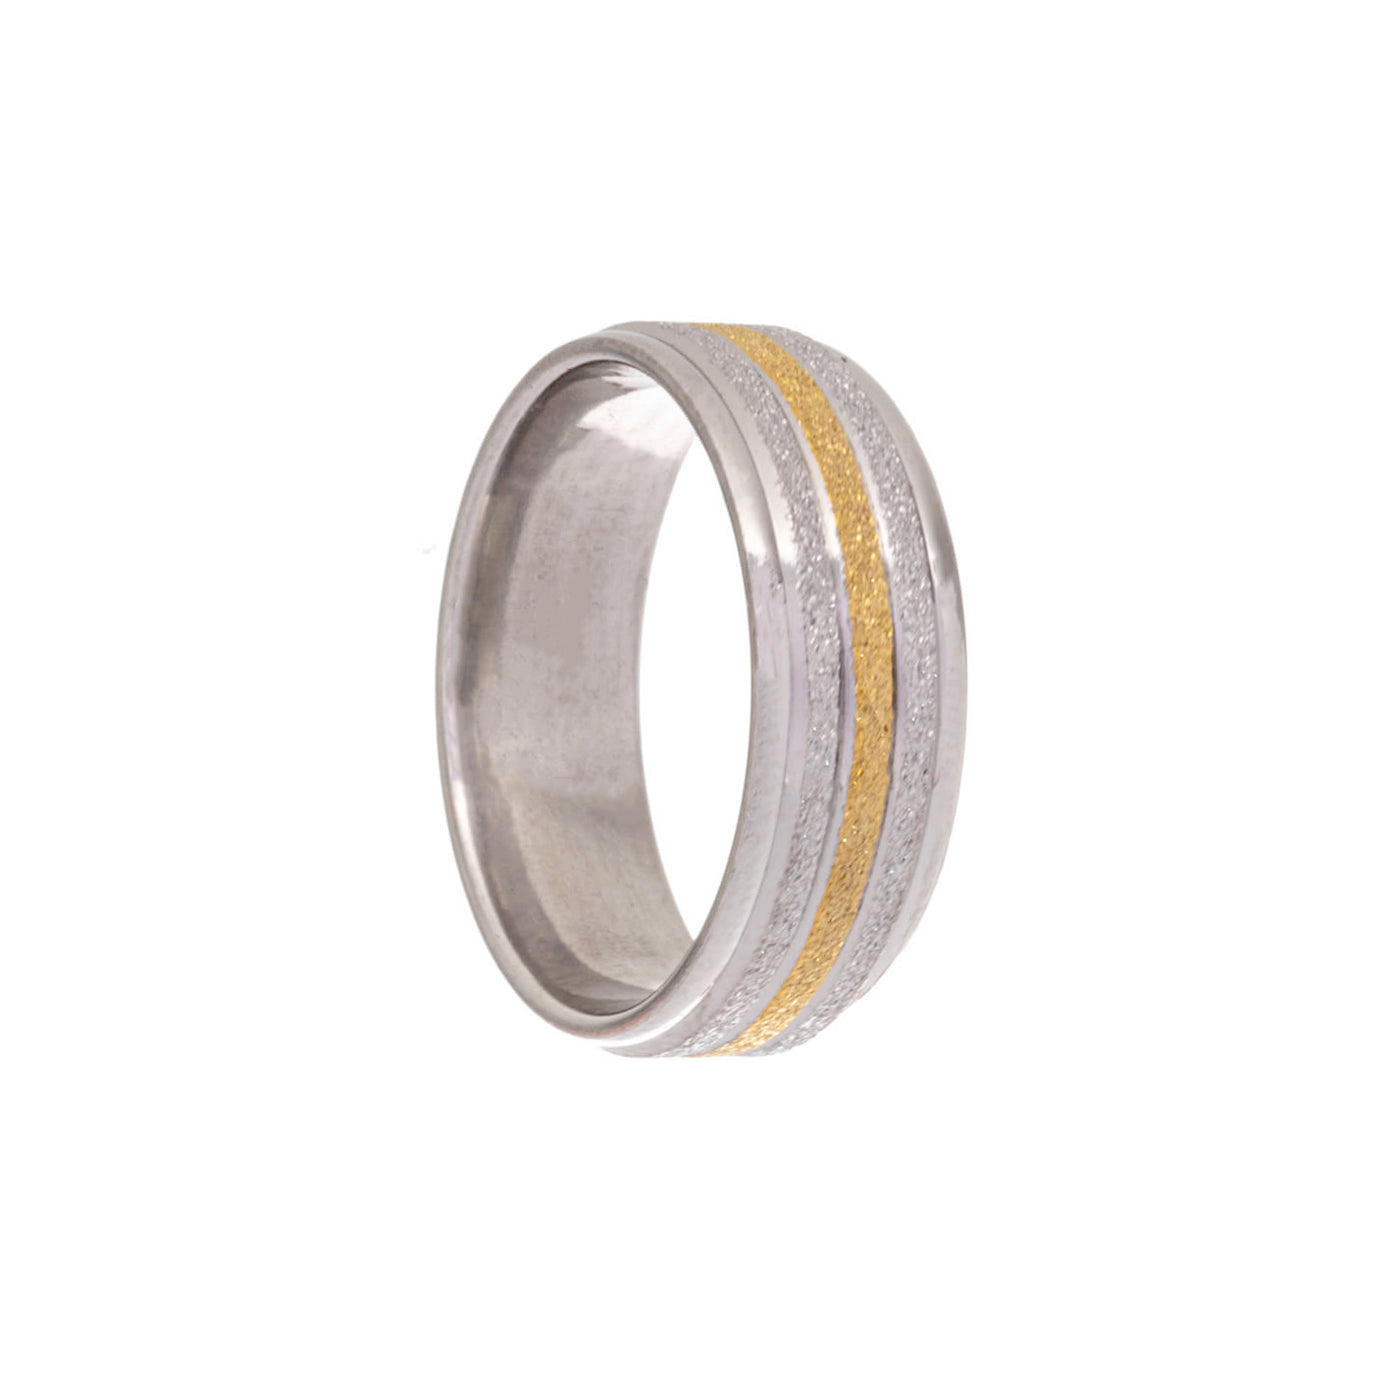 Shiny two-tone steel ring 8mm